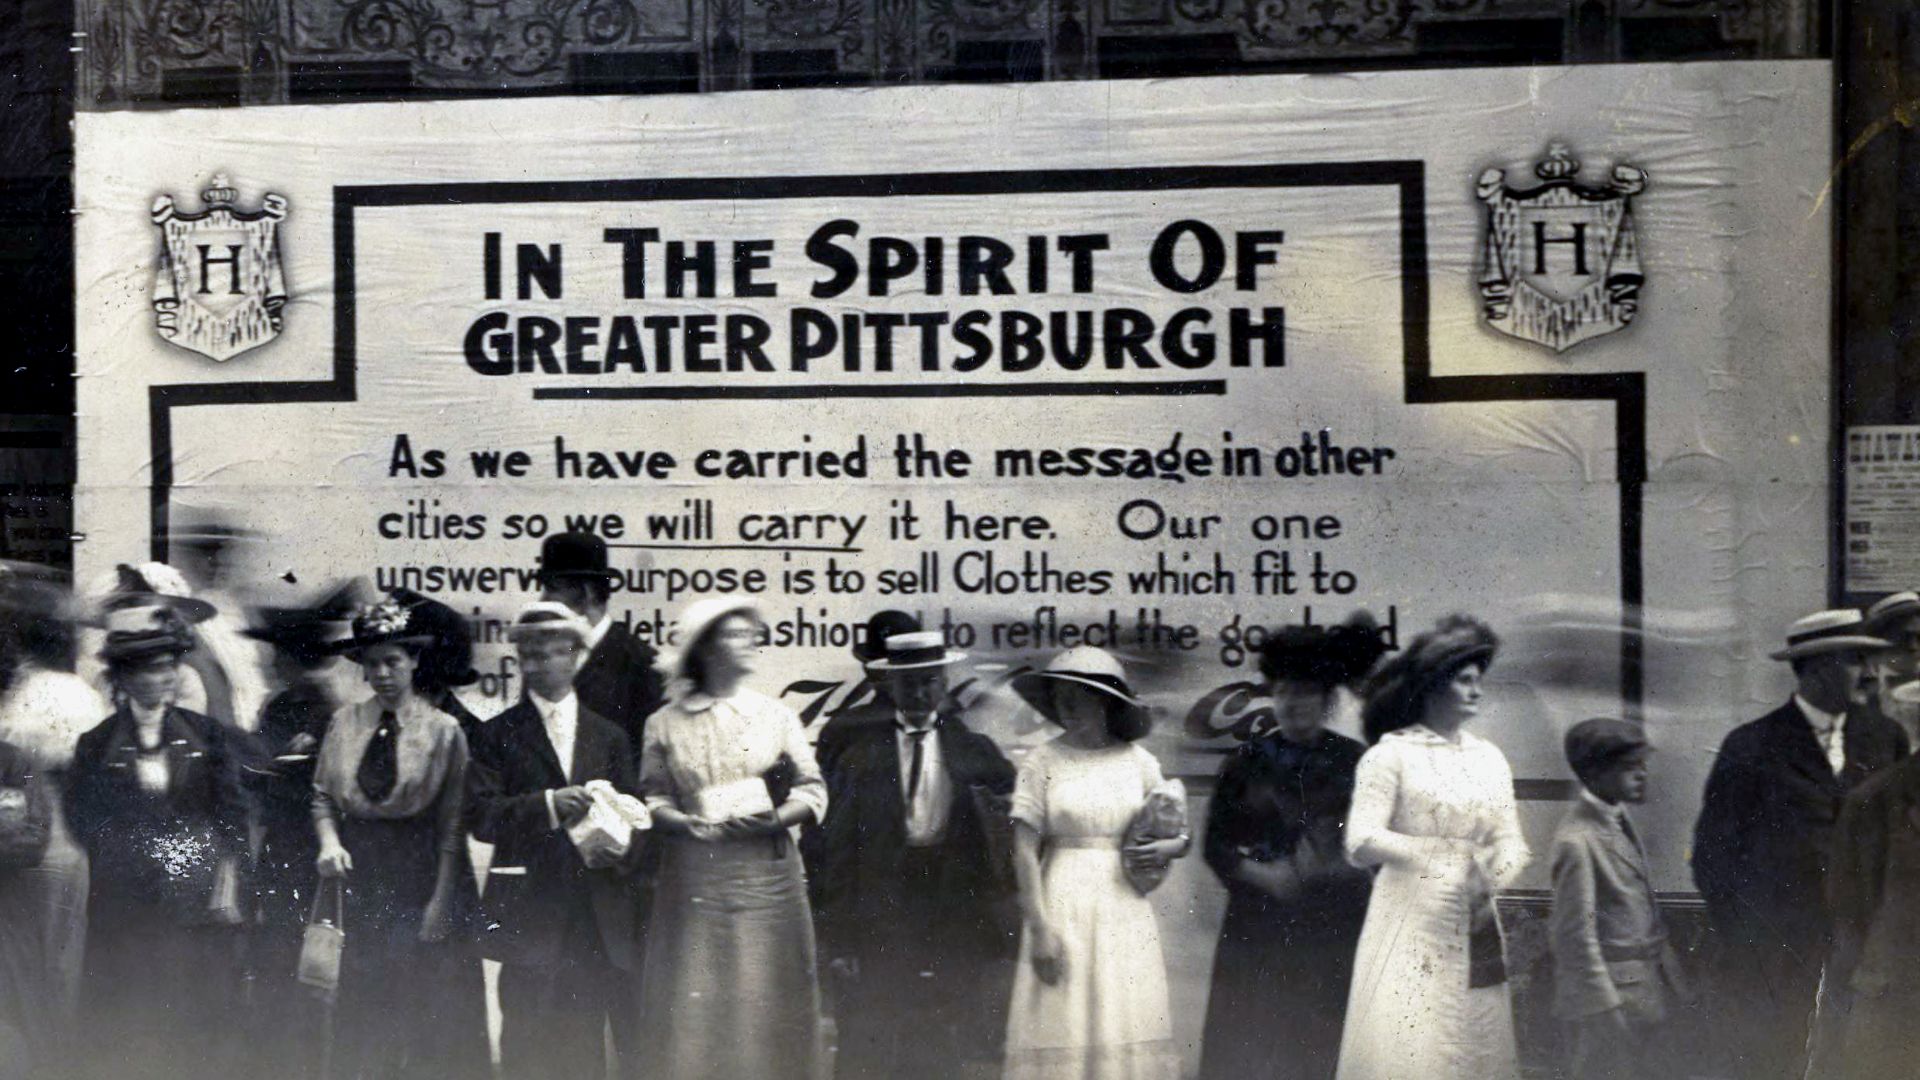 Close up of people standing in front of a painted sign announcing the opening of a new shop "in the spirit of greater Pittsburgh".